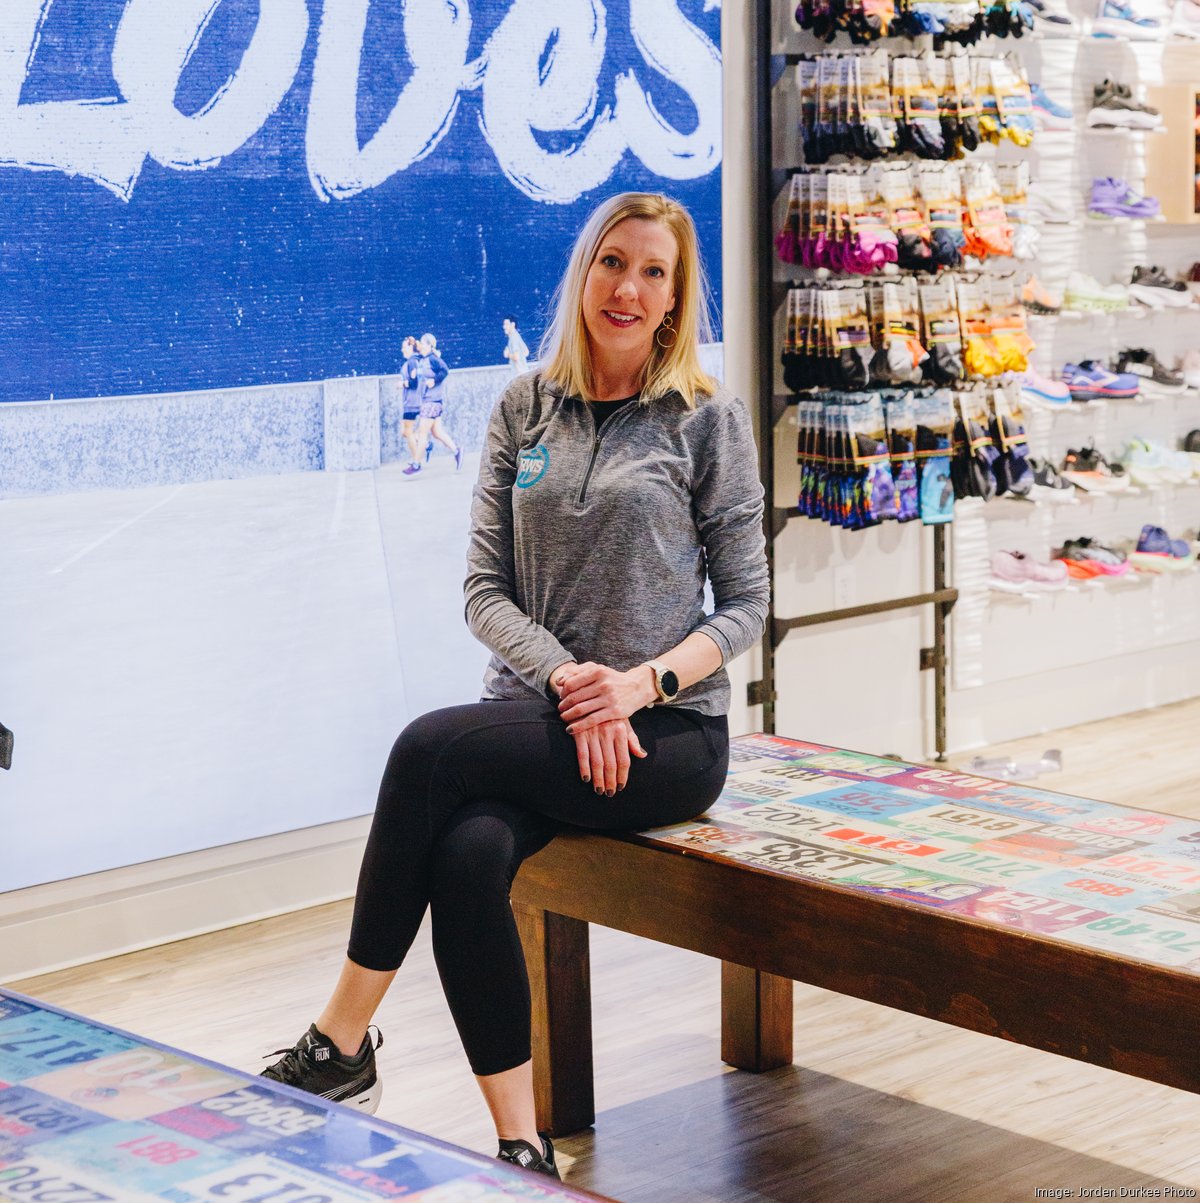 Why Kathy Gates traded her advertising career for The Running Well